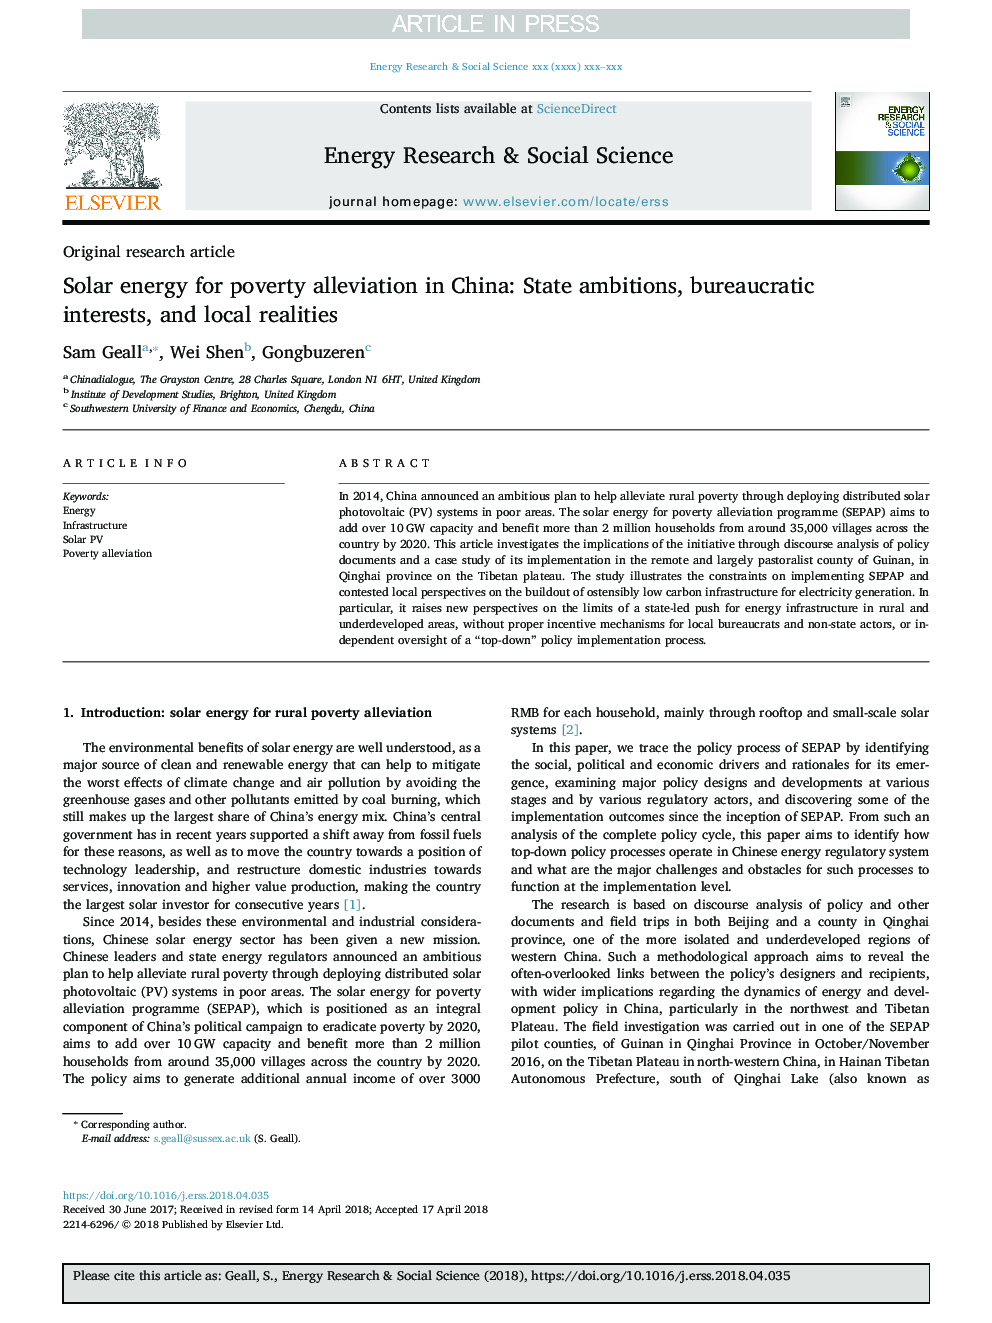 Solar energy for poverty alleviation in China: State ambitions, bureaucratic interests, and local realities